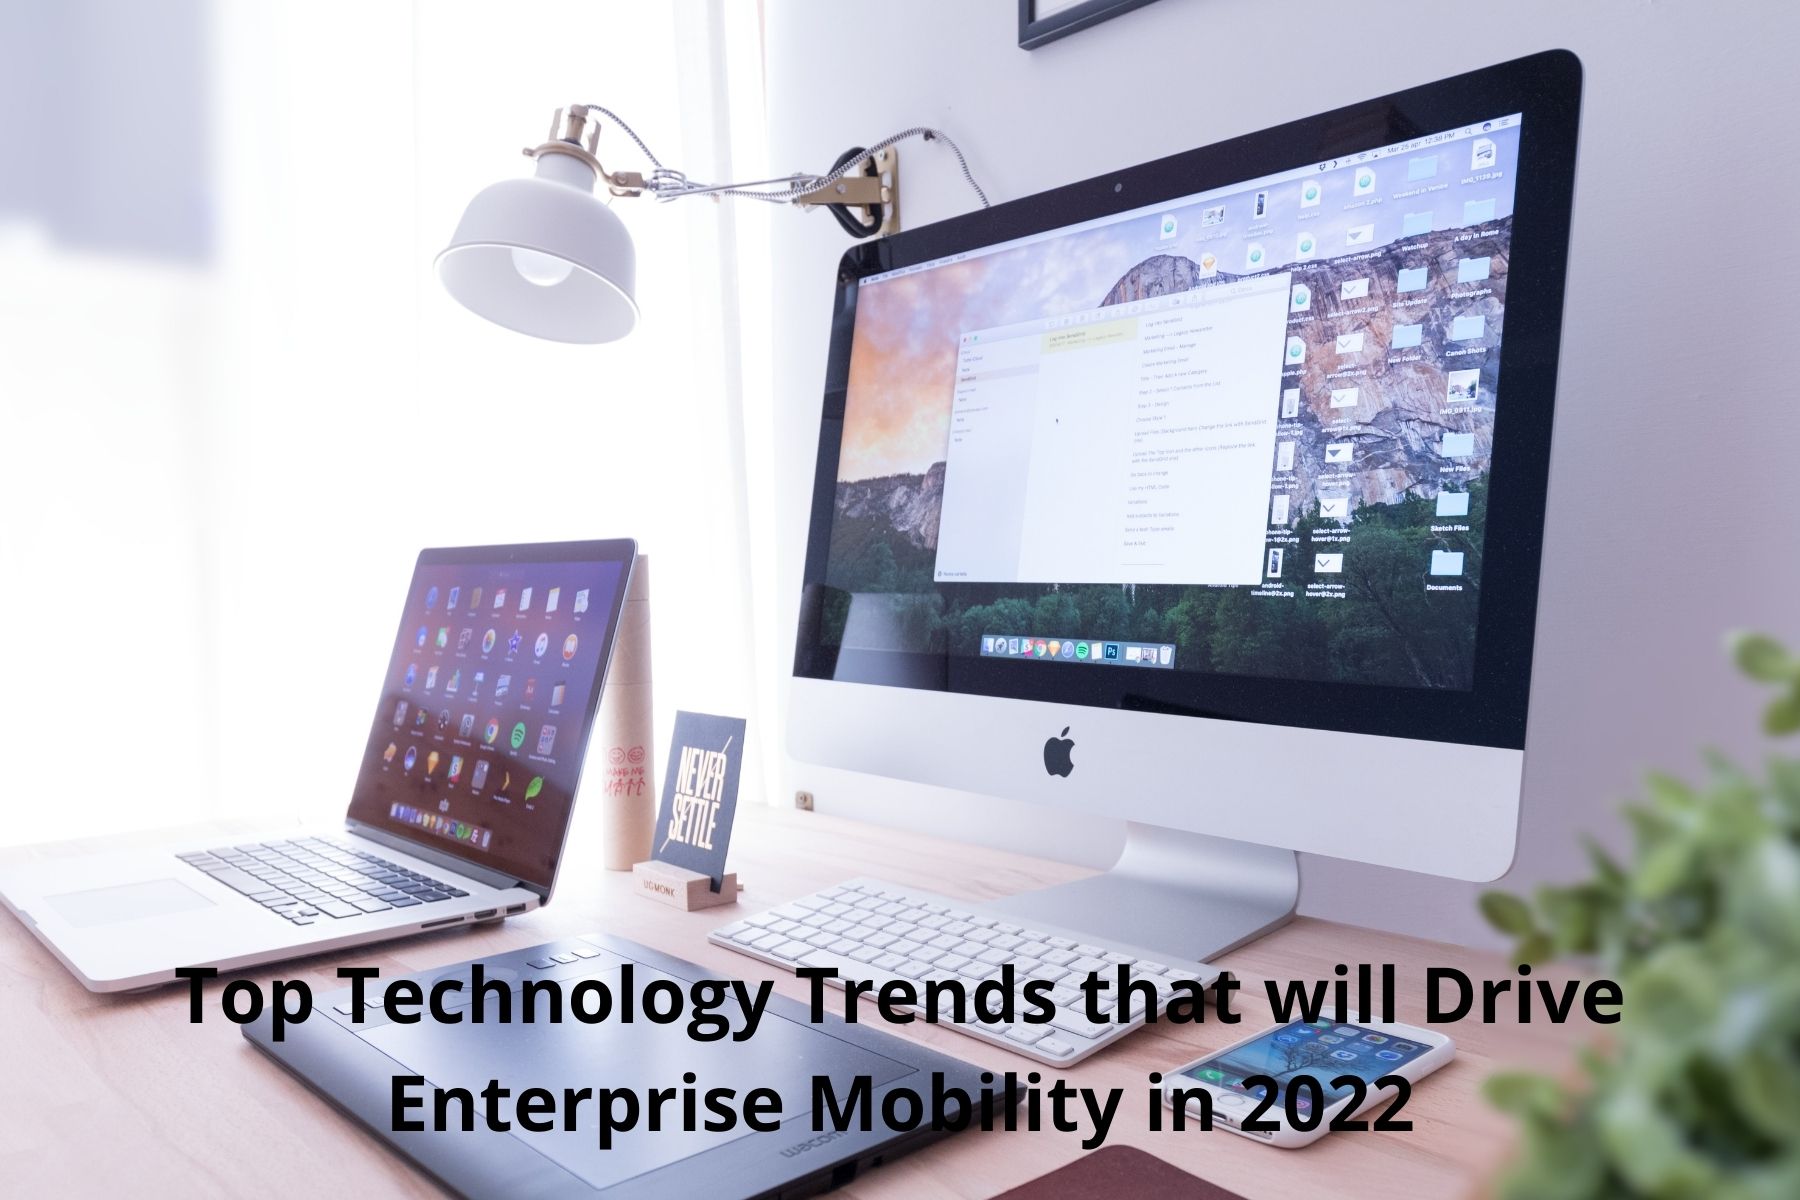 Top Technology Trends that will Drive Enterprise Mobility in 2022